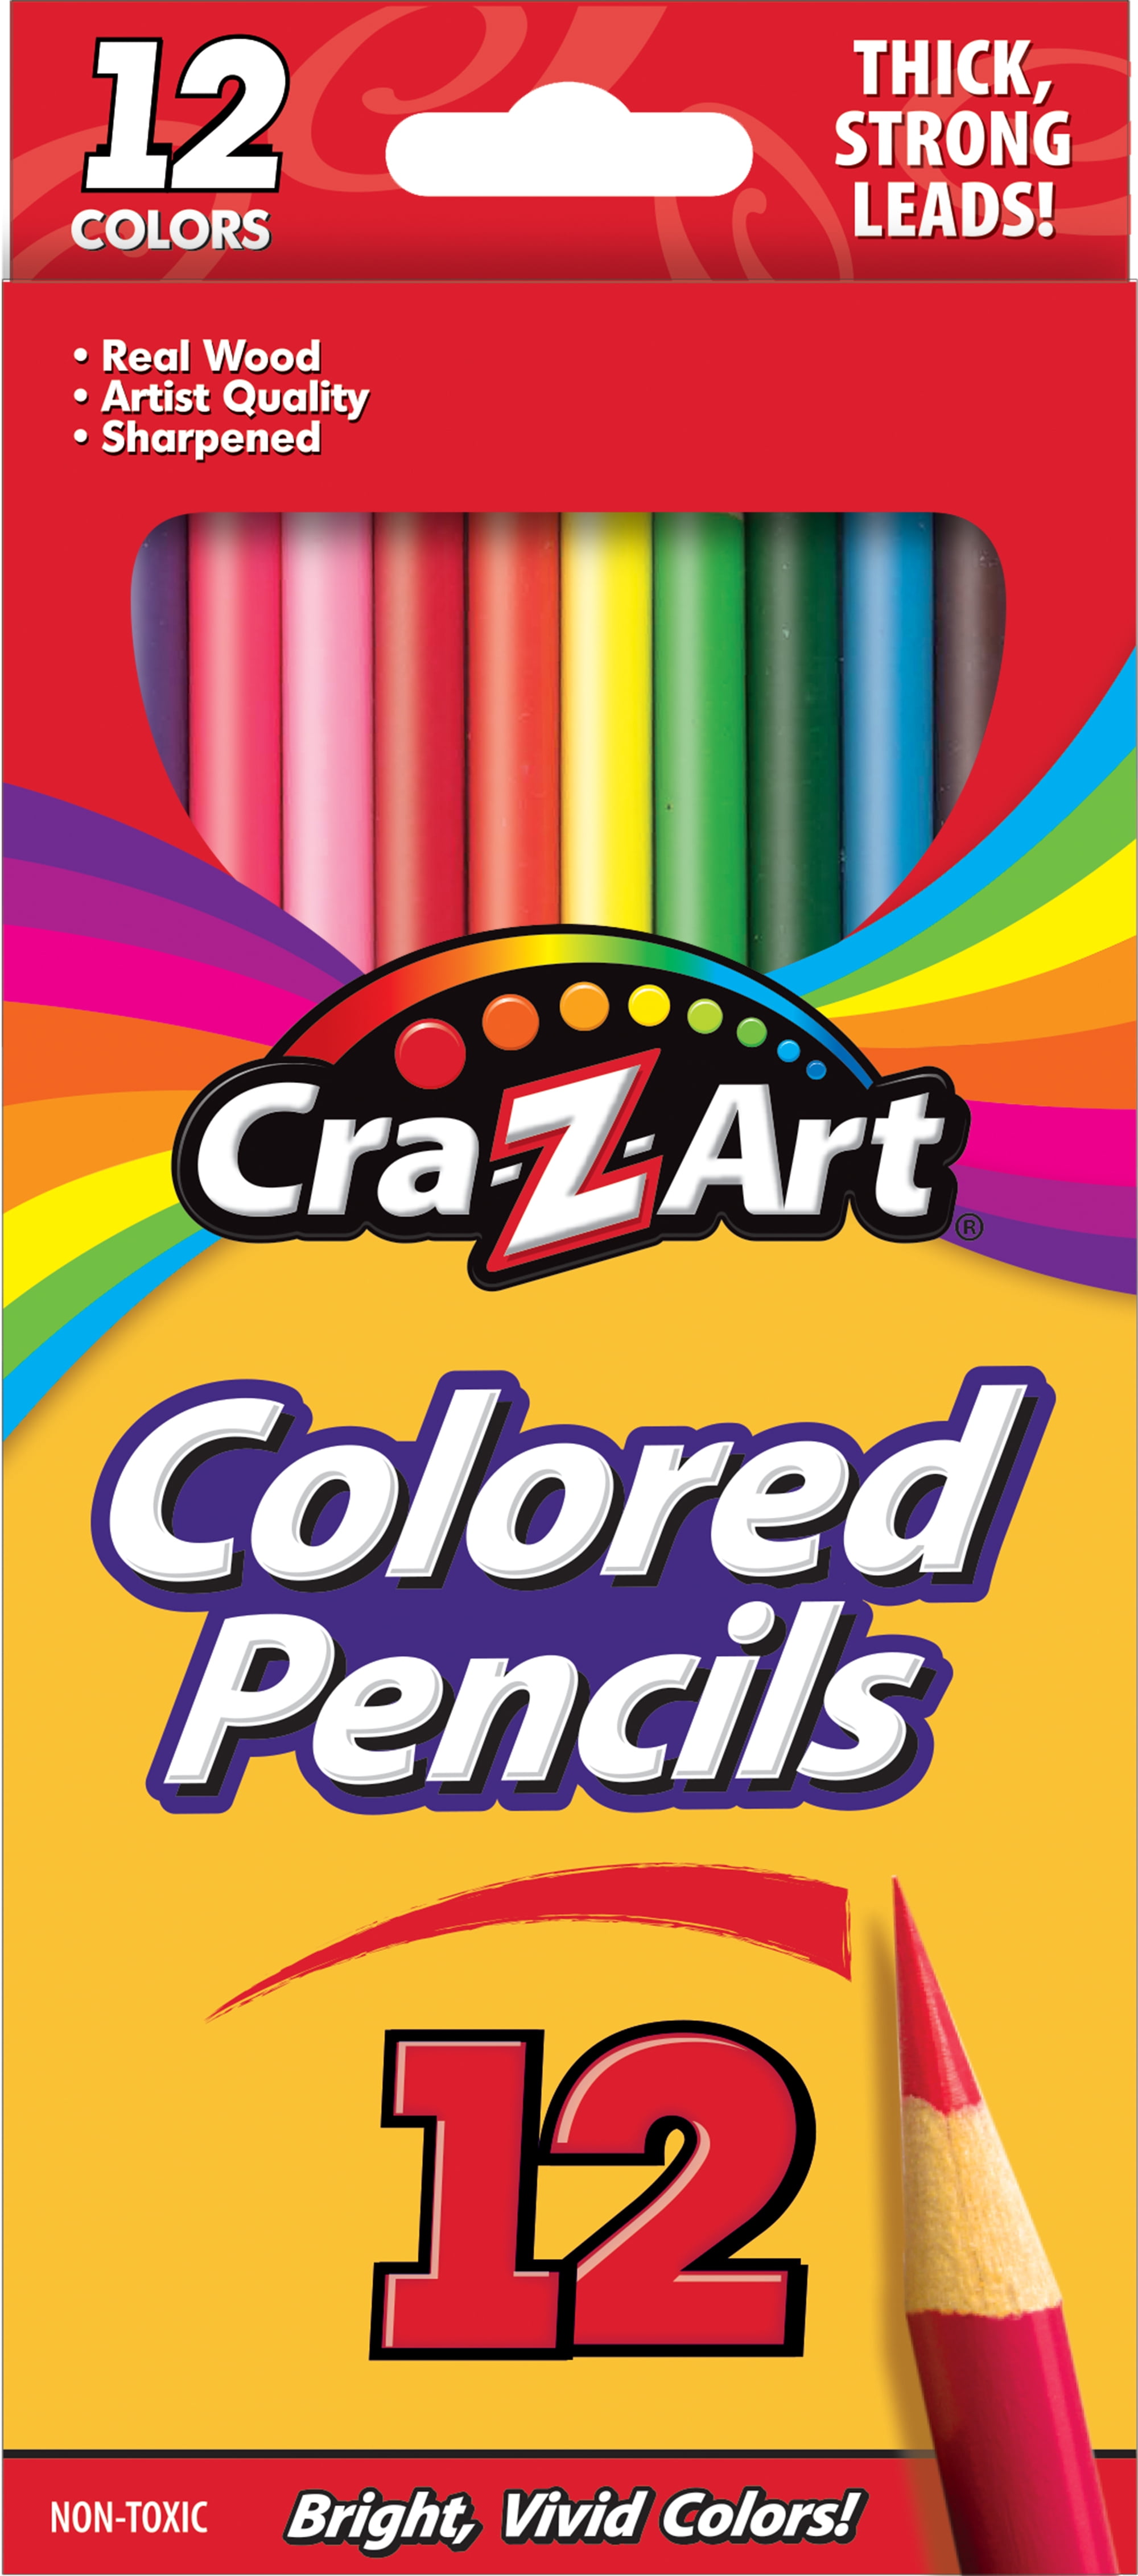 AZZAKVG Stationery Supplies Quality Large Pencils Artists Drawing Kids Adults Colored Pencils for Kids Ages 8-12 Kids Crafts, Blue